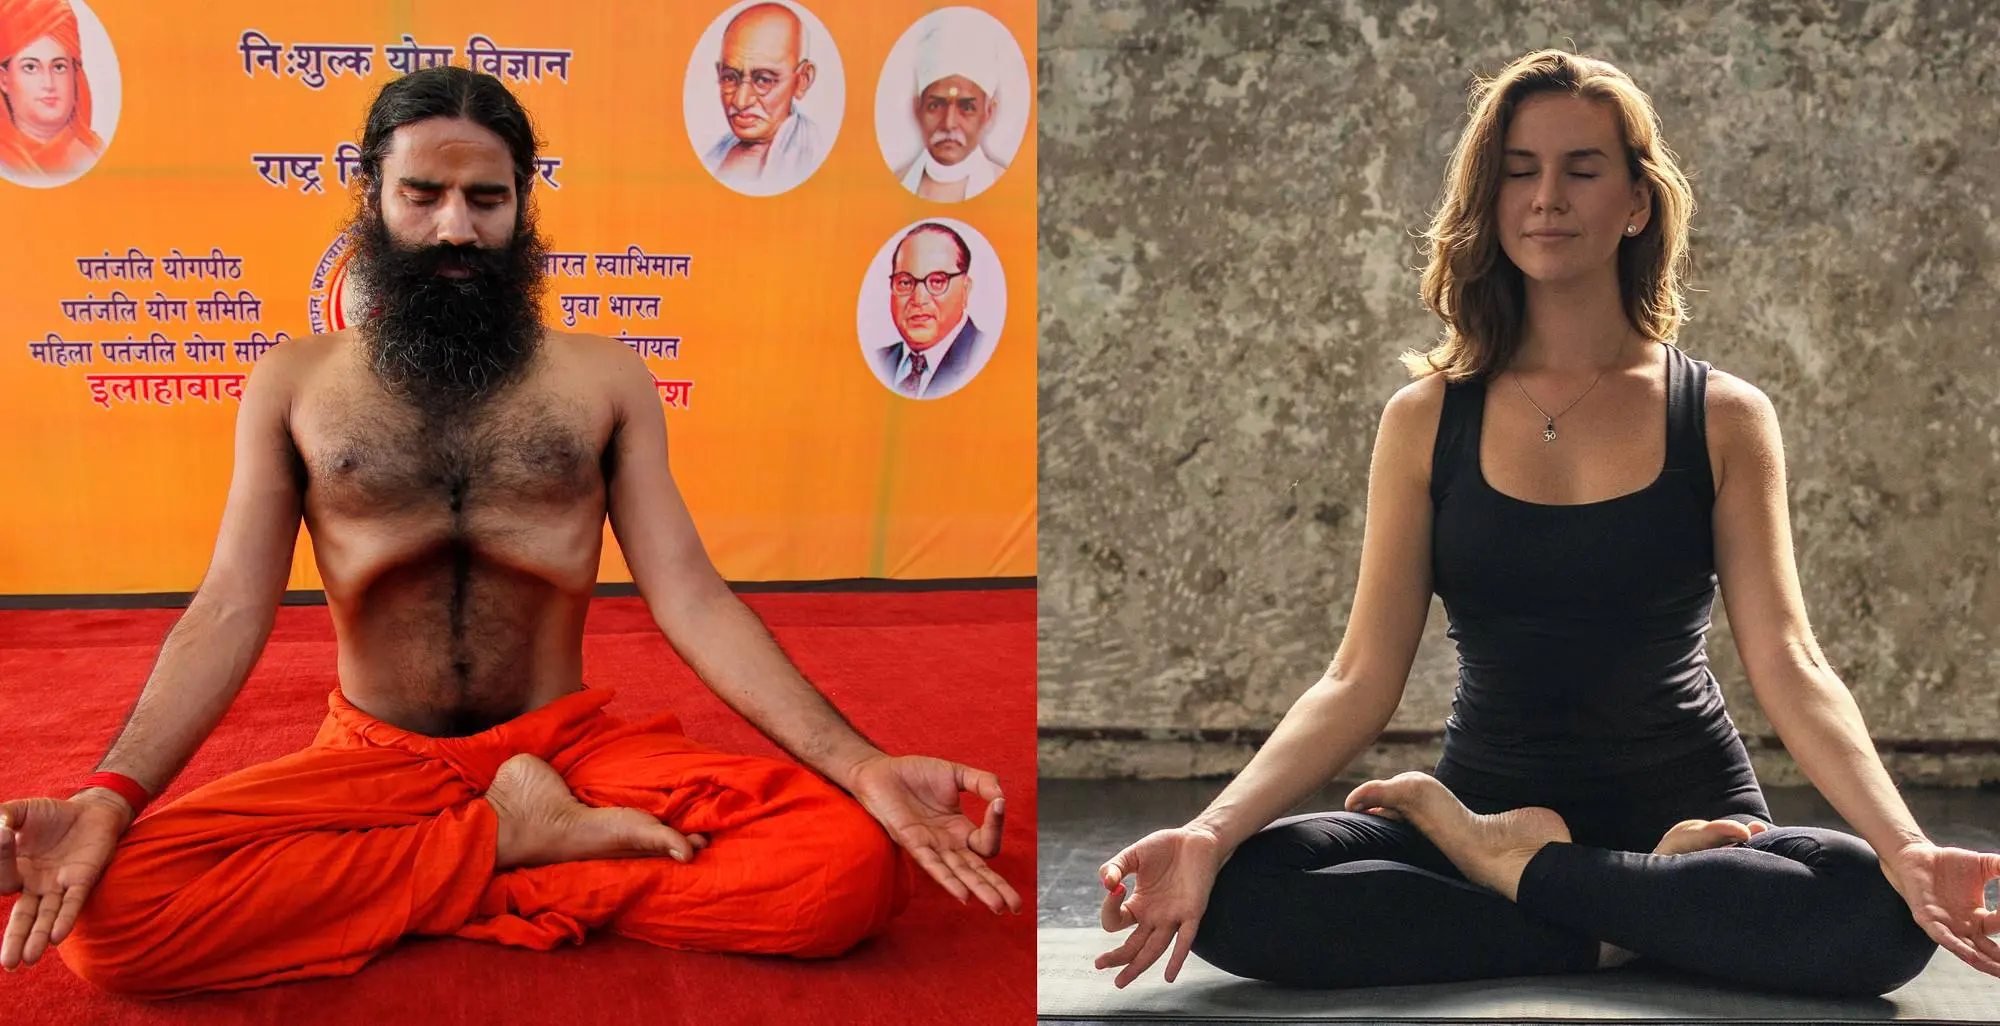 yoga cultural appropriation - How to avoid cultural appropriation in yoga